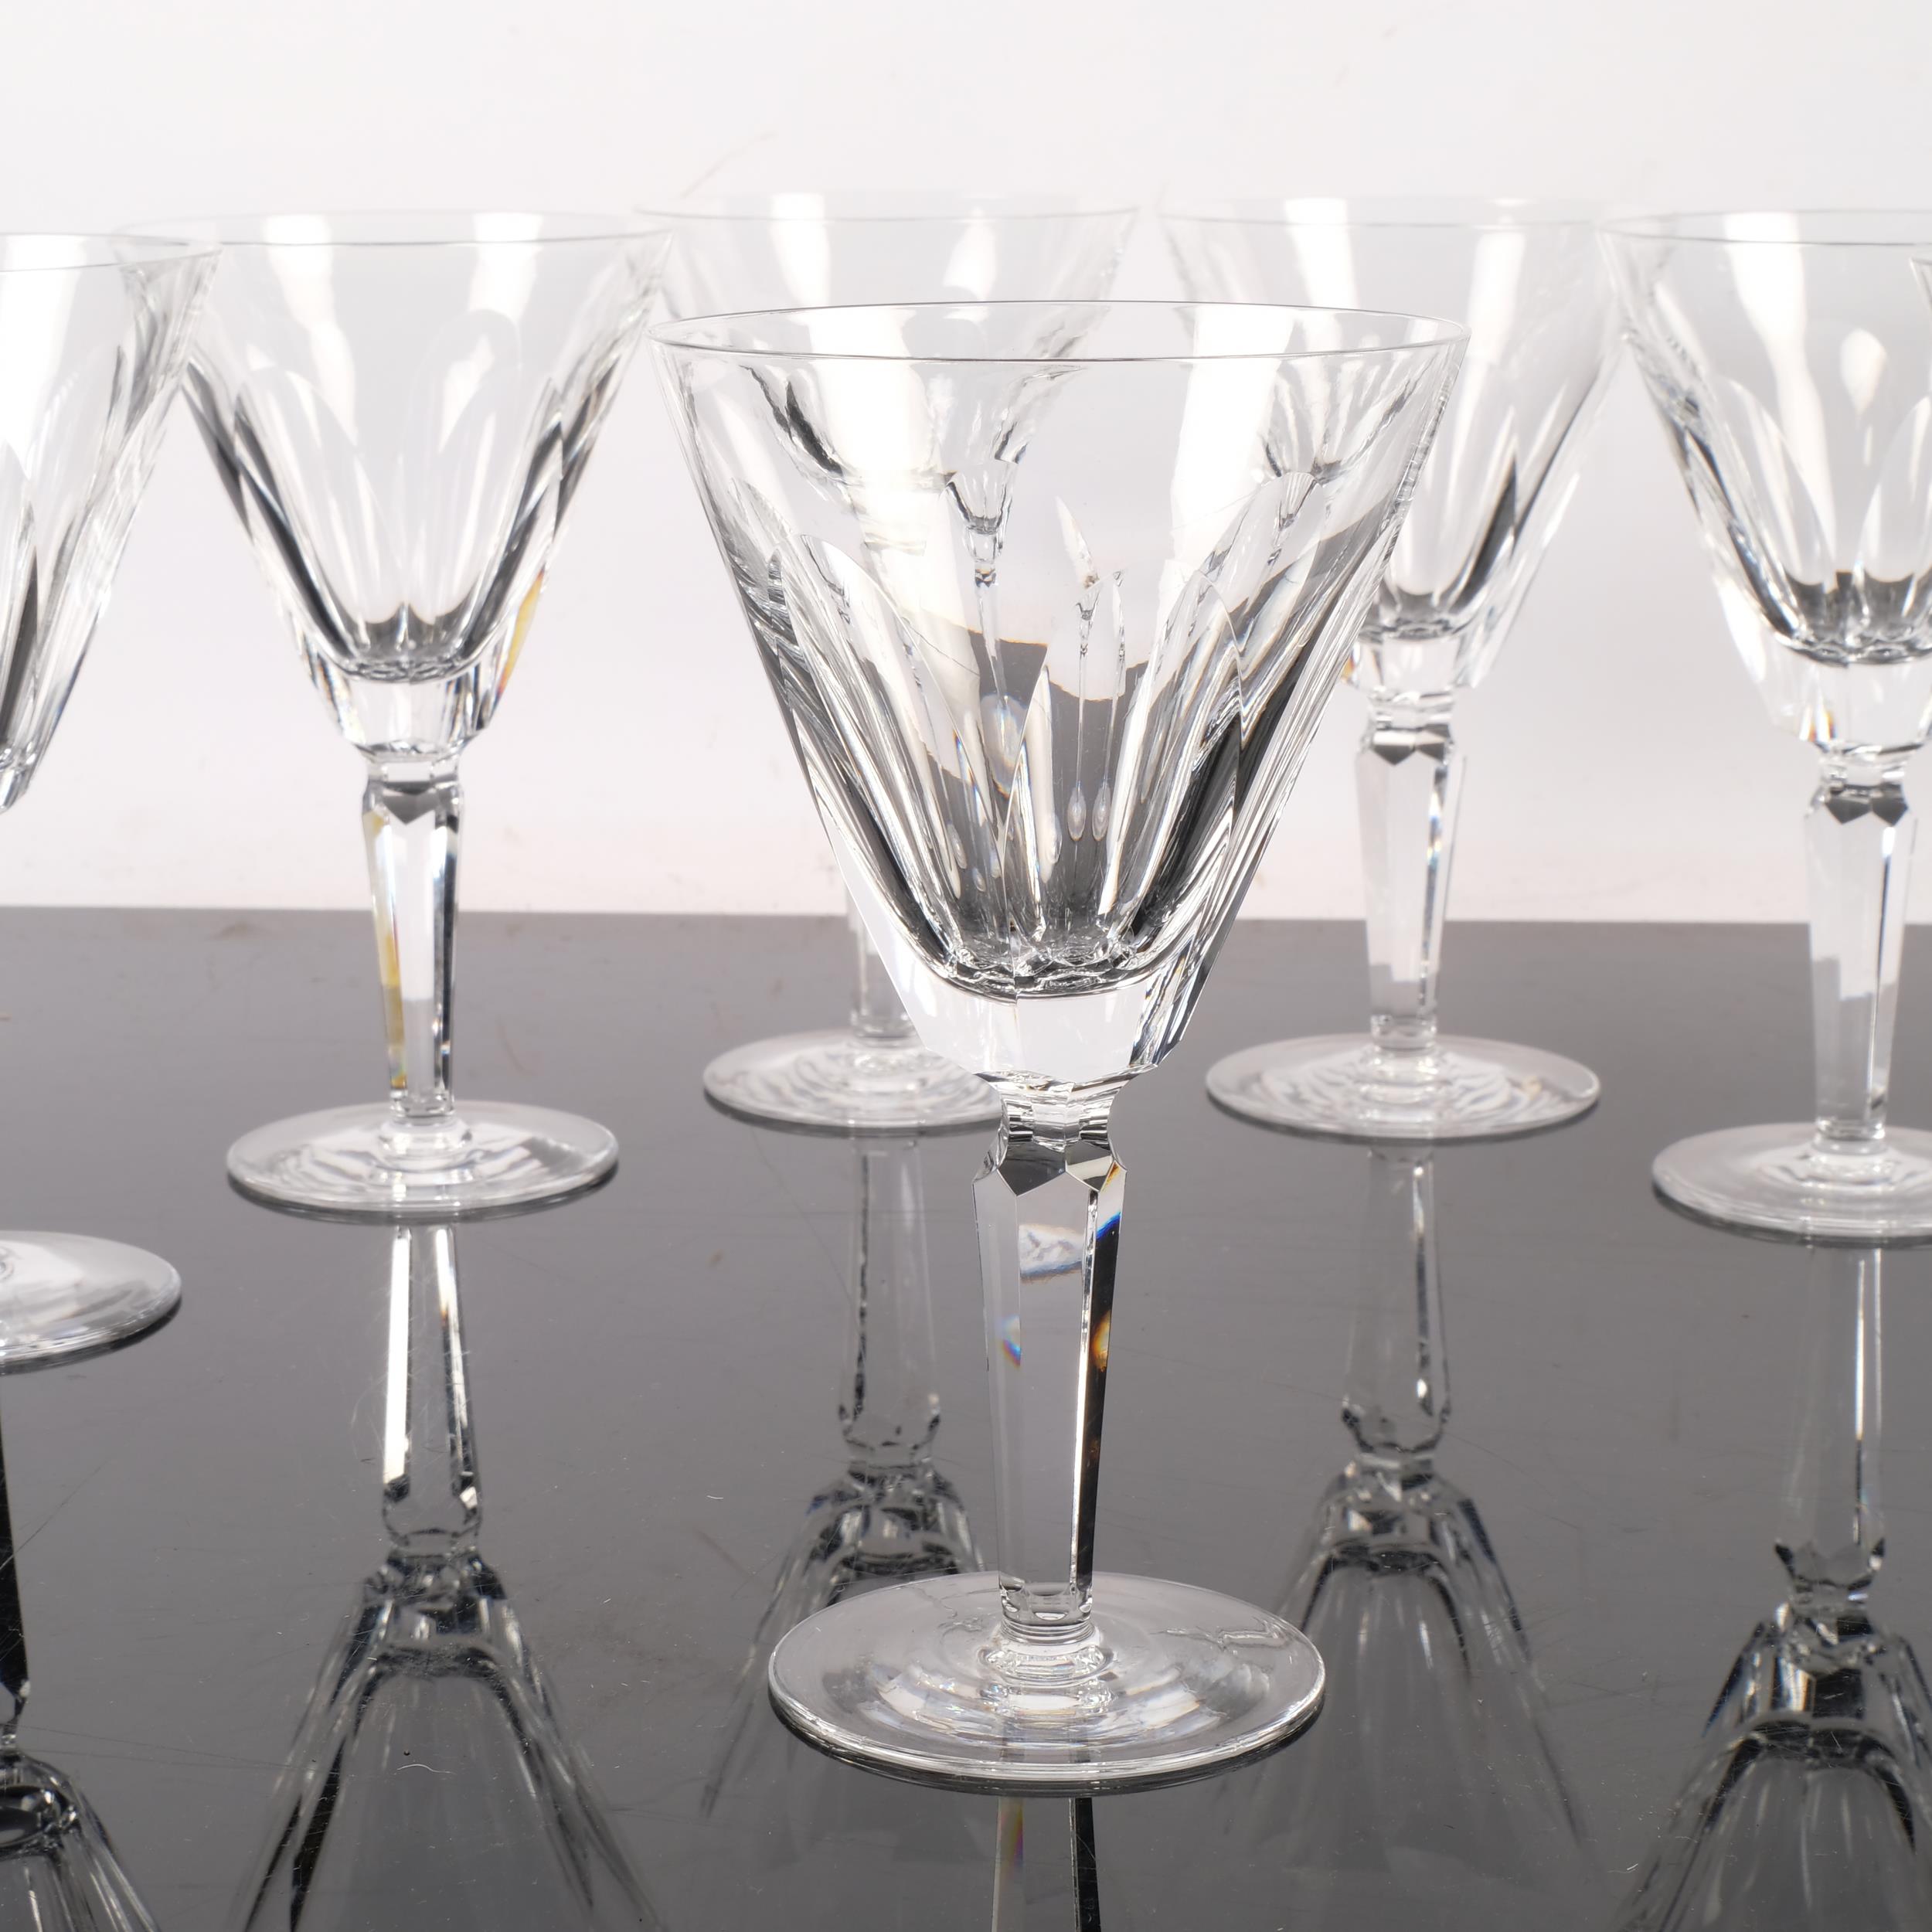 A set of 8 Waterford Crystal large wine glasses, 17.5cm - Image 2 of 2